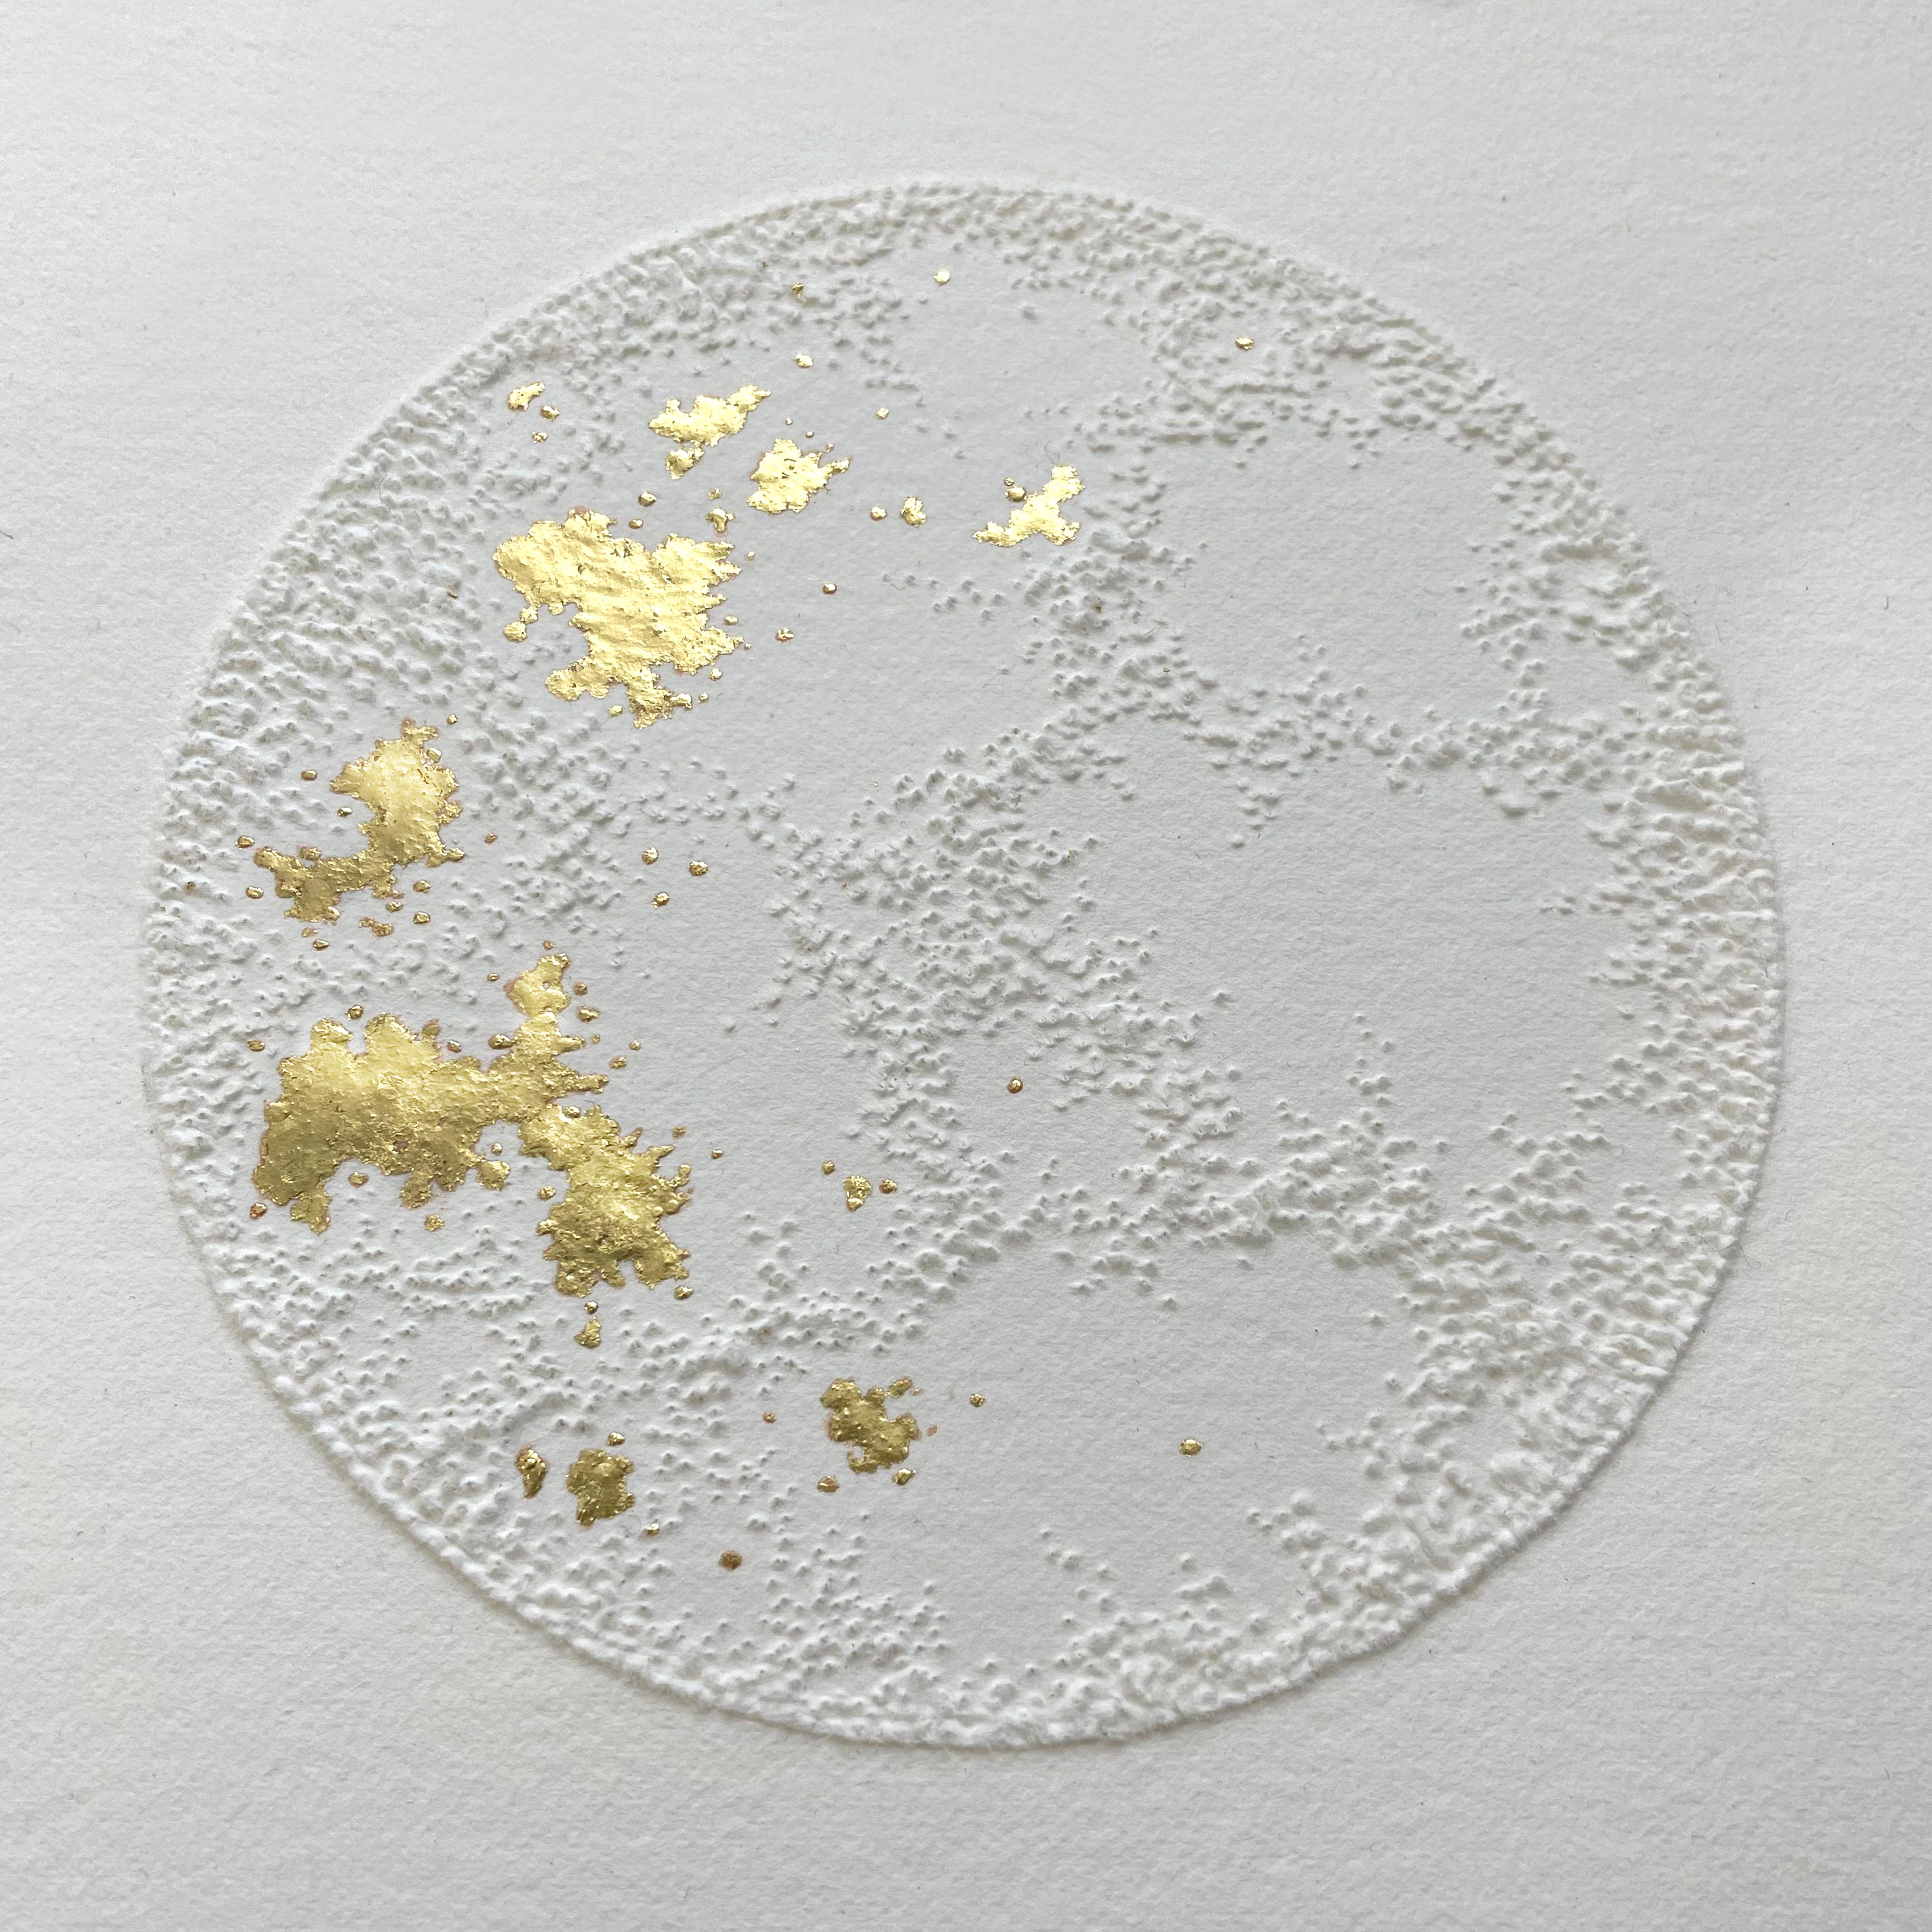 Moon 1 - white 3D abstract circle with gold leaves and pulled paper fiber - Gold Abstract Drawing by Antonin Anzil